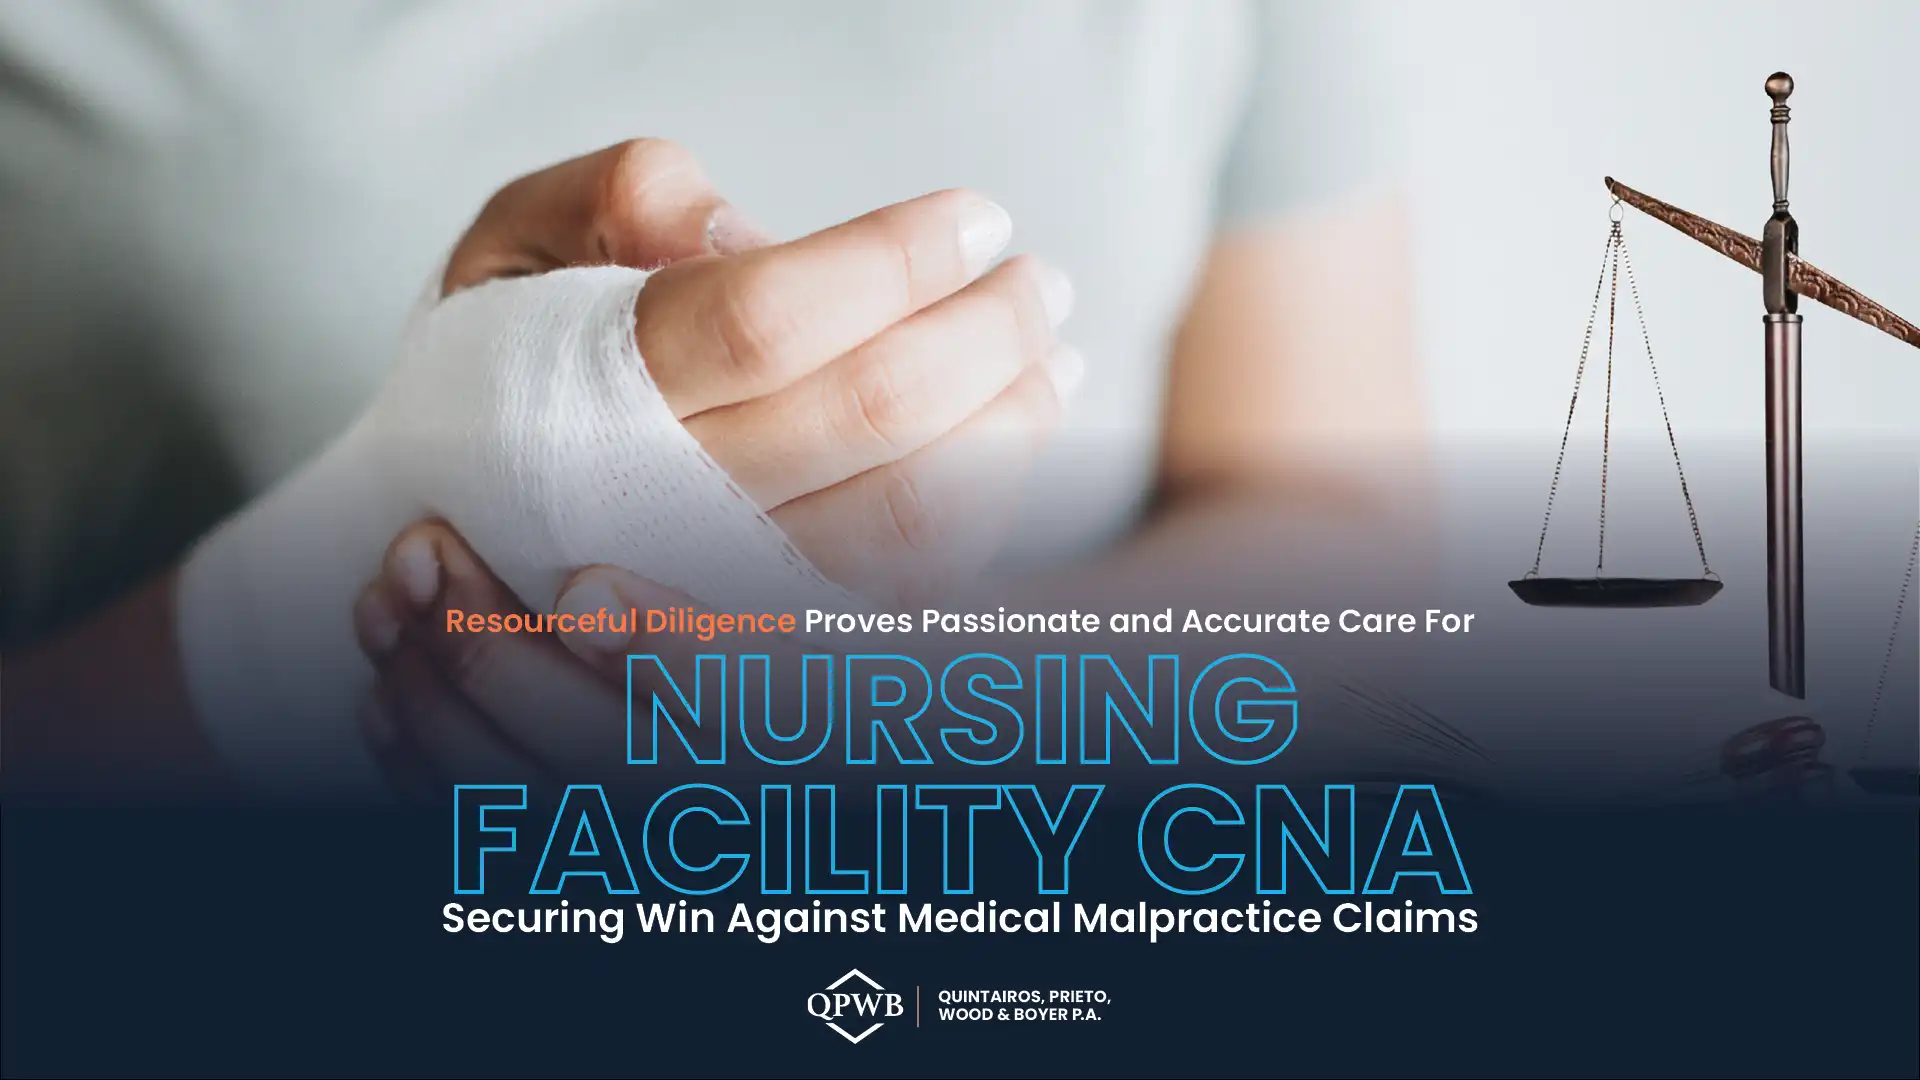 Resourceful Diligence Proves Passionate and Accurate Care For Nursing Facility CNA Securing Win Against Medical Malpractice Claims